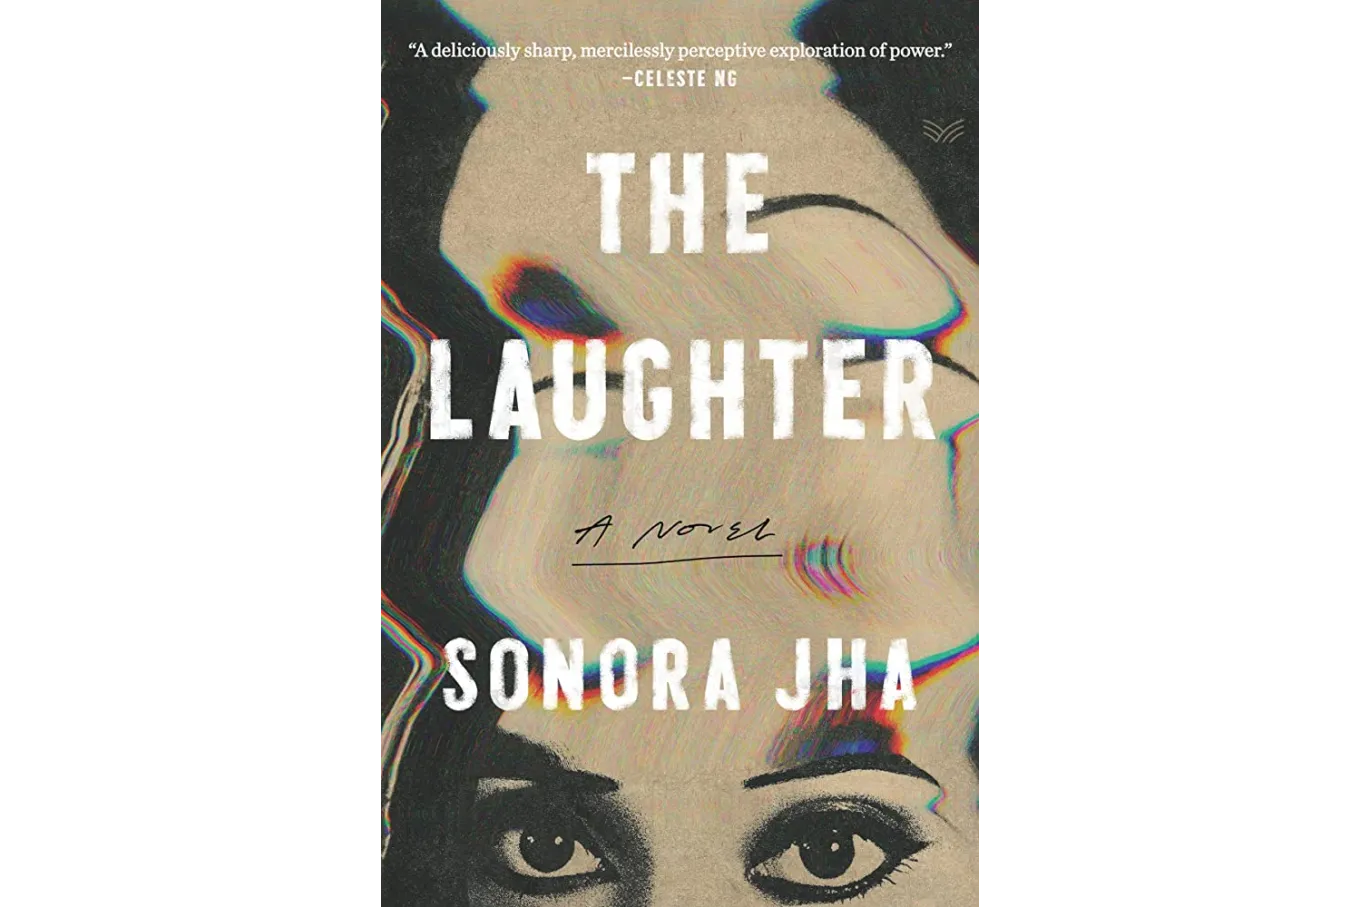 cover of The Laughter. Lettering is white against a surreal background of a distorted face. The woman on the cover has heavy black eyeliner.